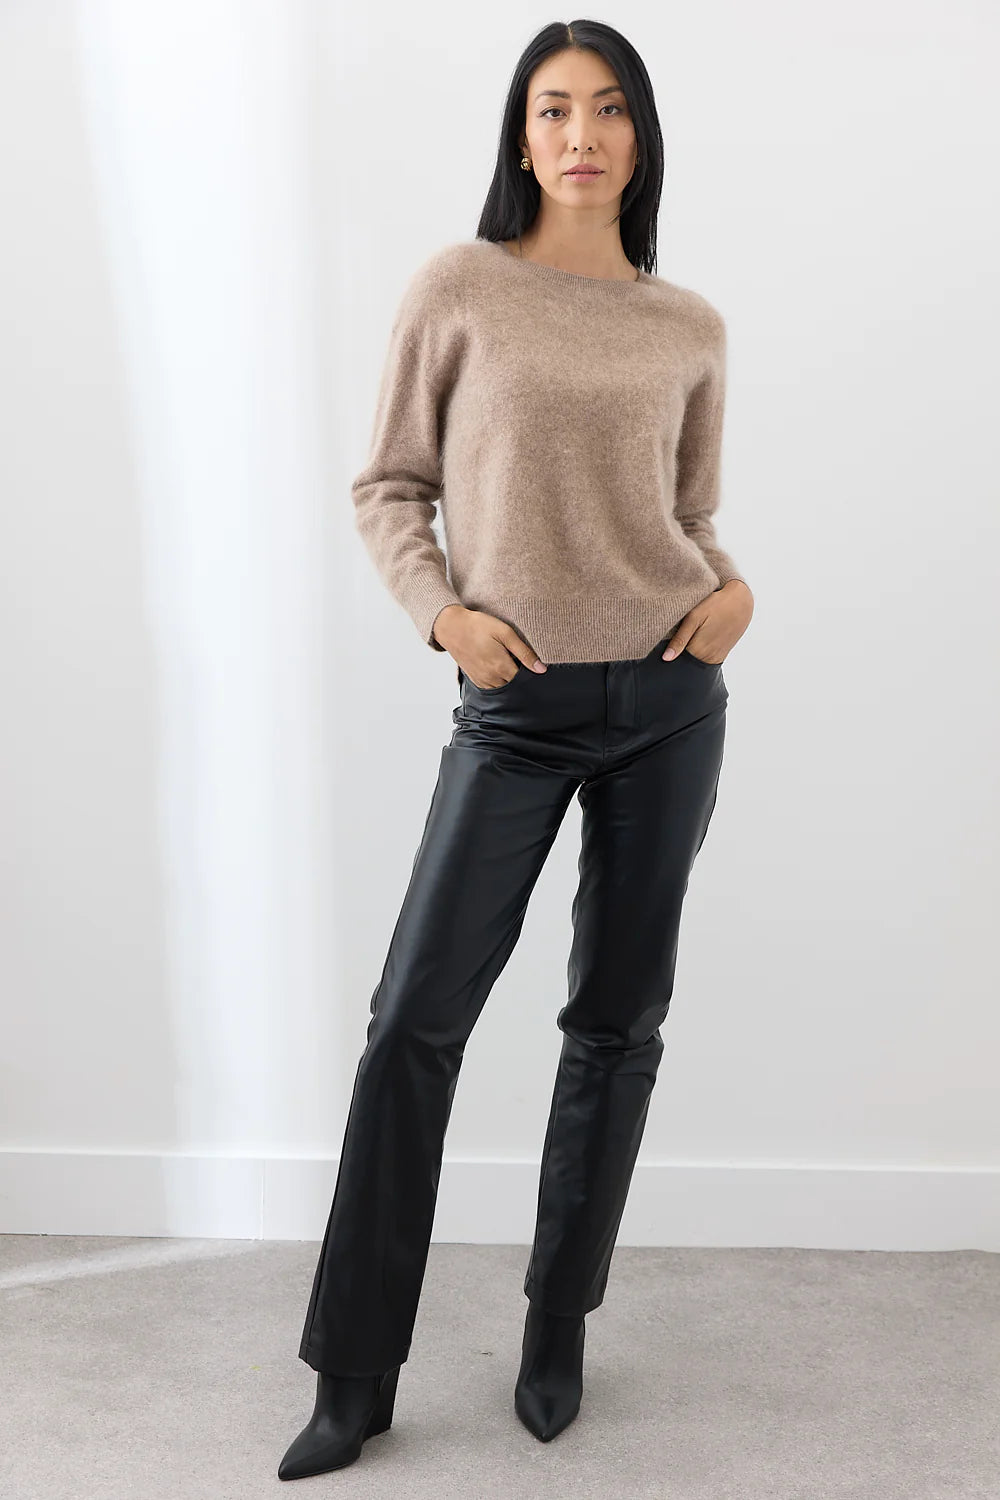 Cyra Sweater in Biscuit by Mia Fratino